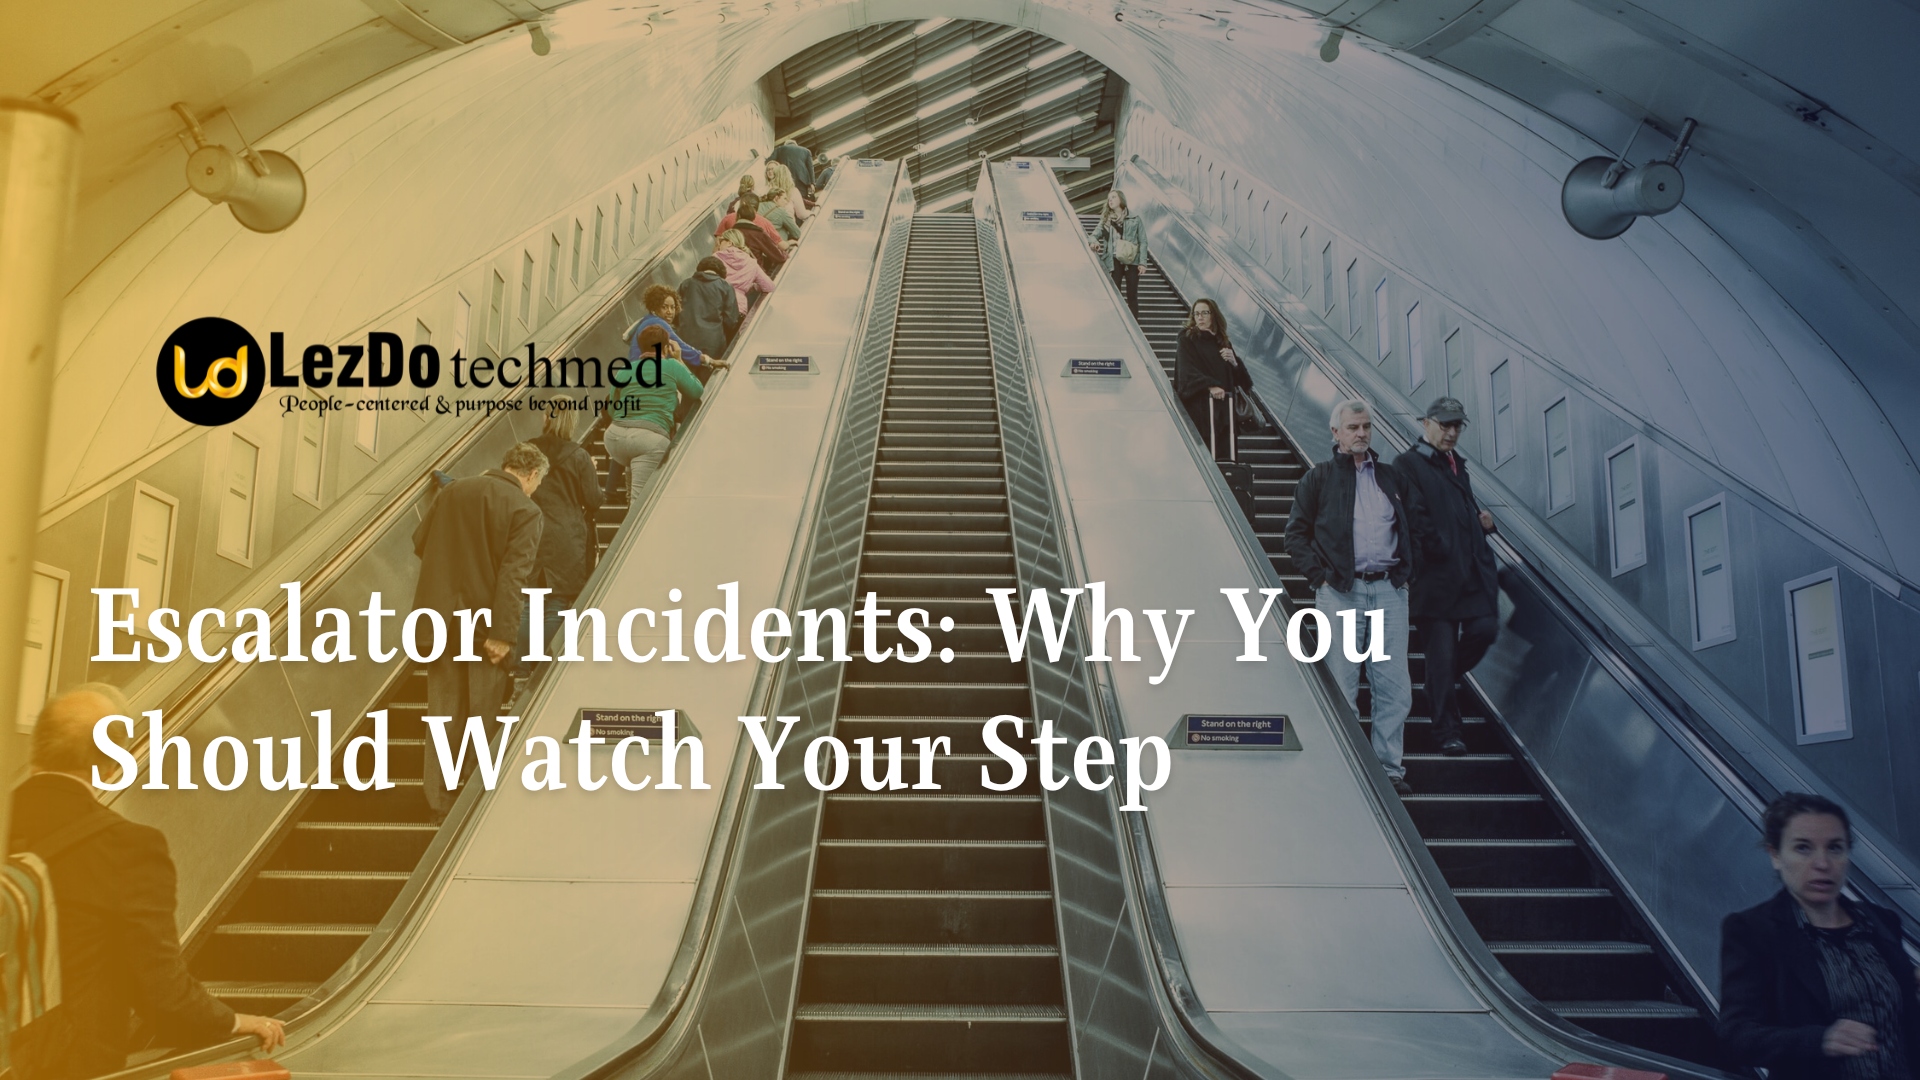 Escalator Incidents: Why You Should Watch Your Step